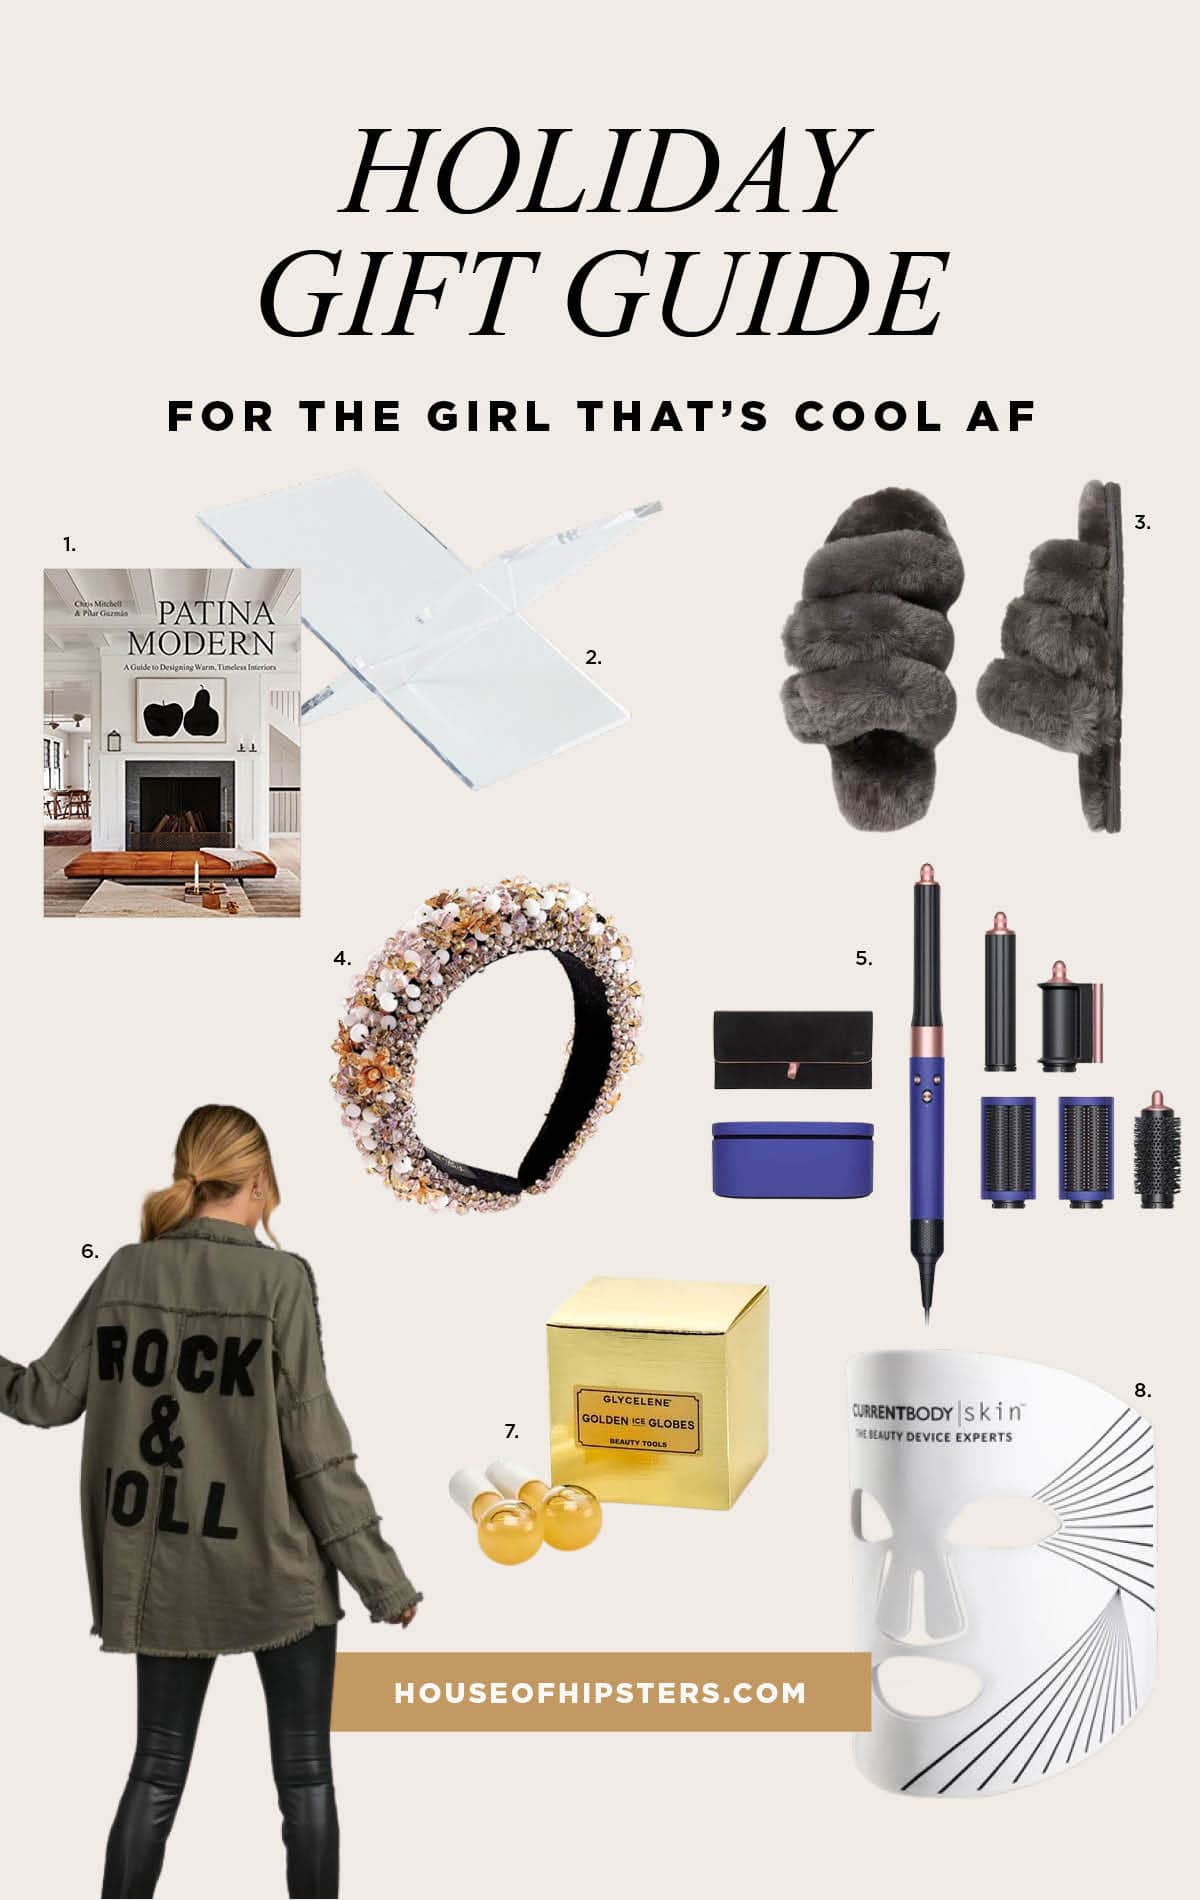 55 Wonderfully Unusual Gifts For Women That She Definitely Didn't Know She  Needed